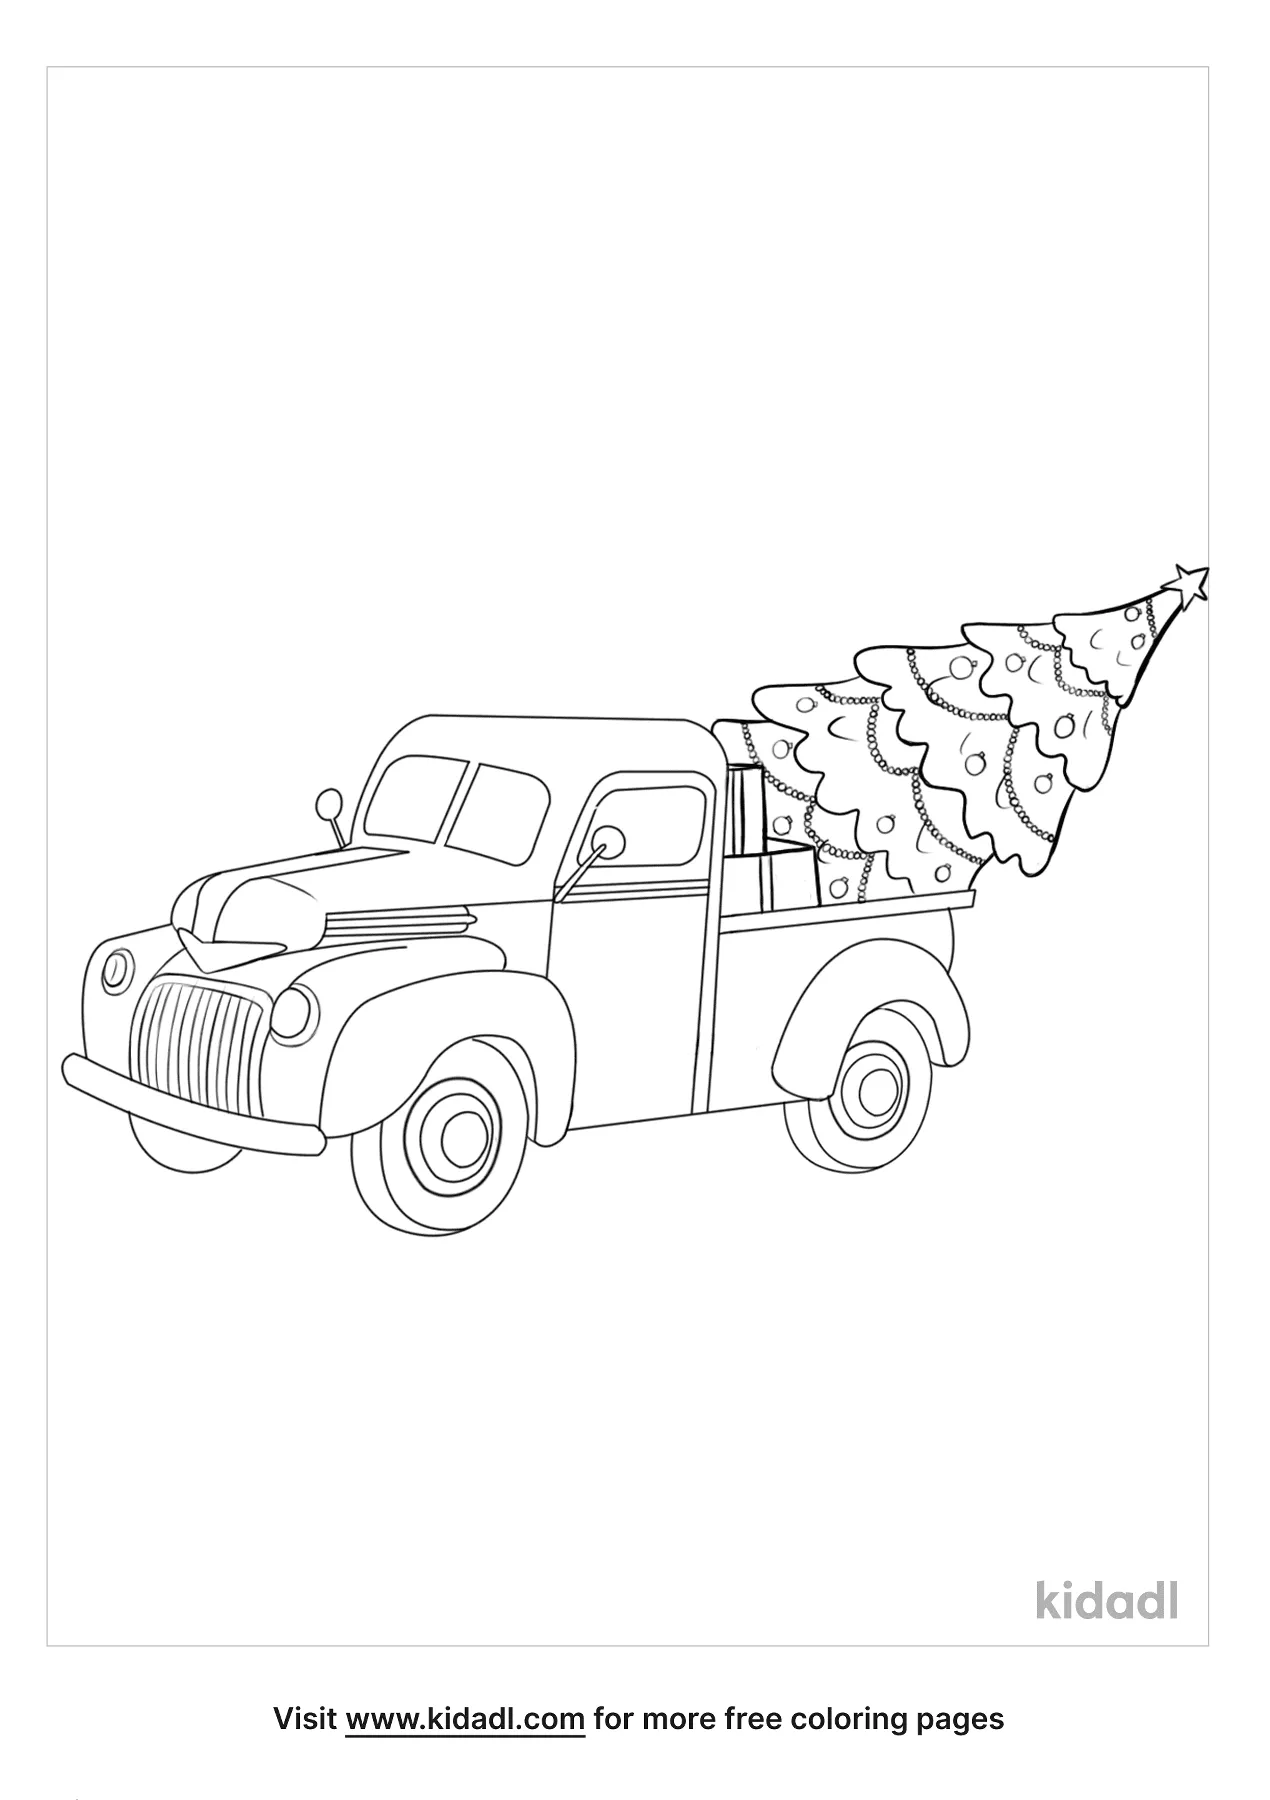 28-clever-photograph-christmas-truck-coloring-page-christmas-truck